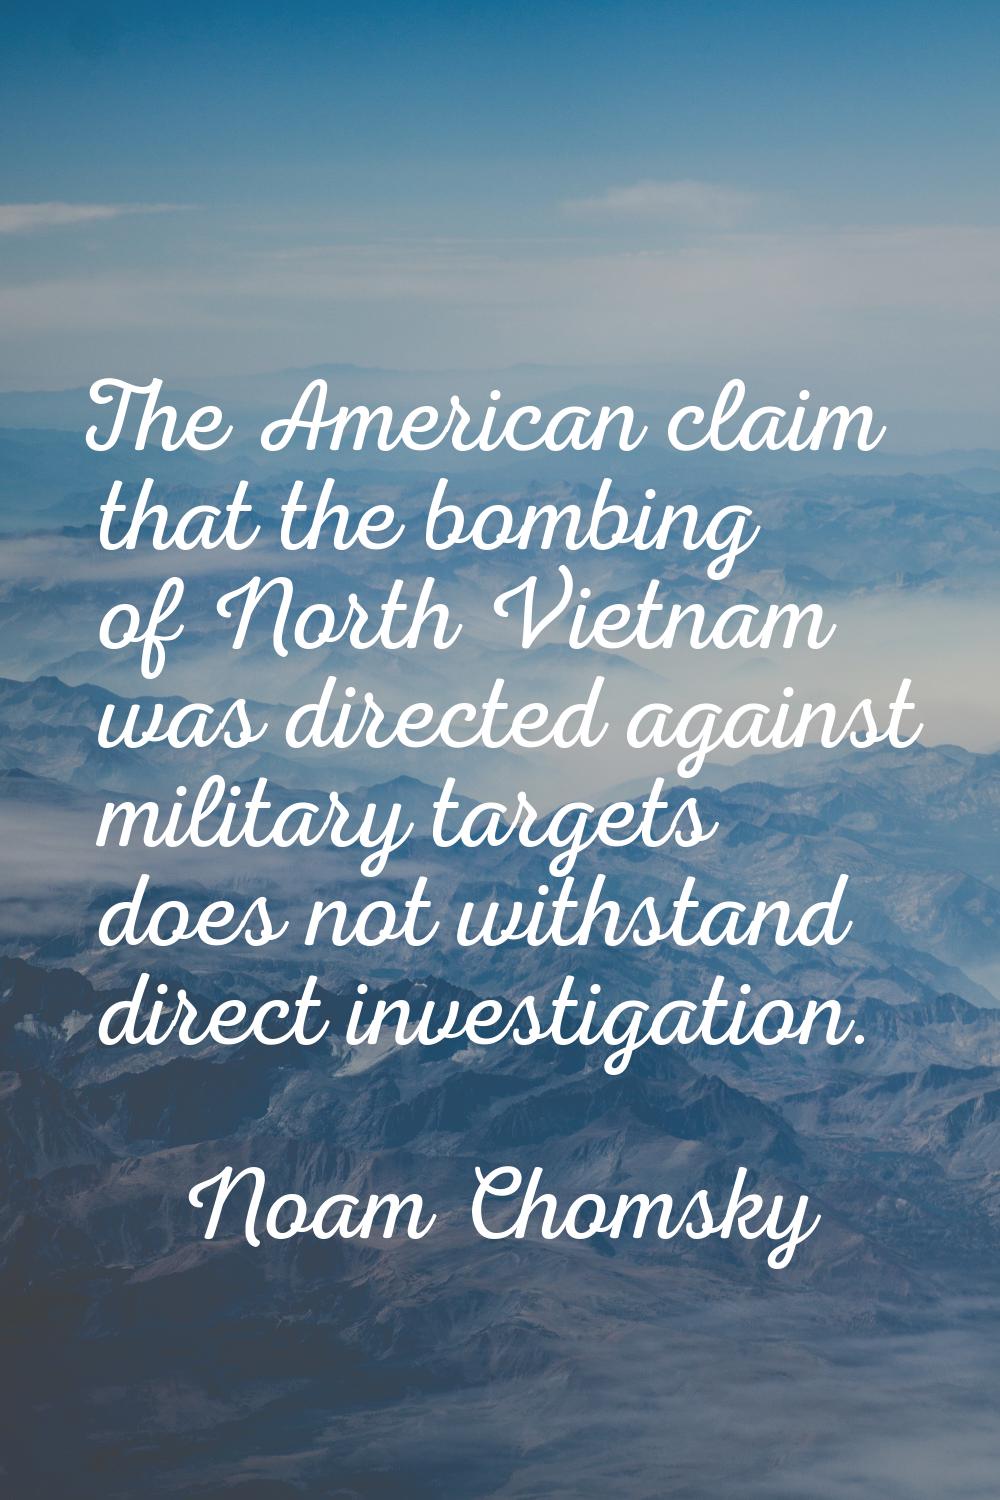 The American claim that the bombing of North Vietnam was directed against military targets does not